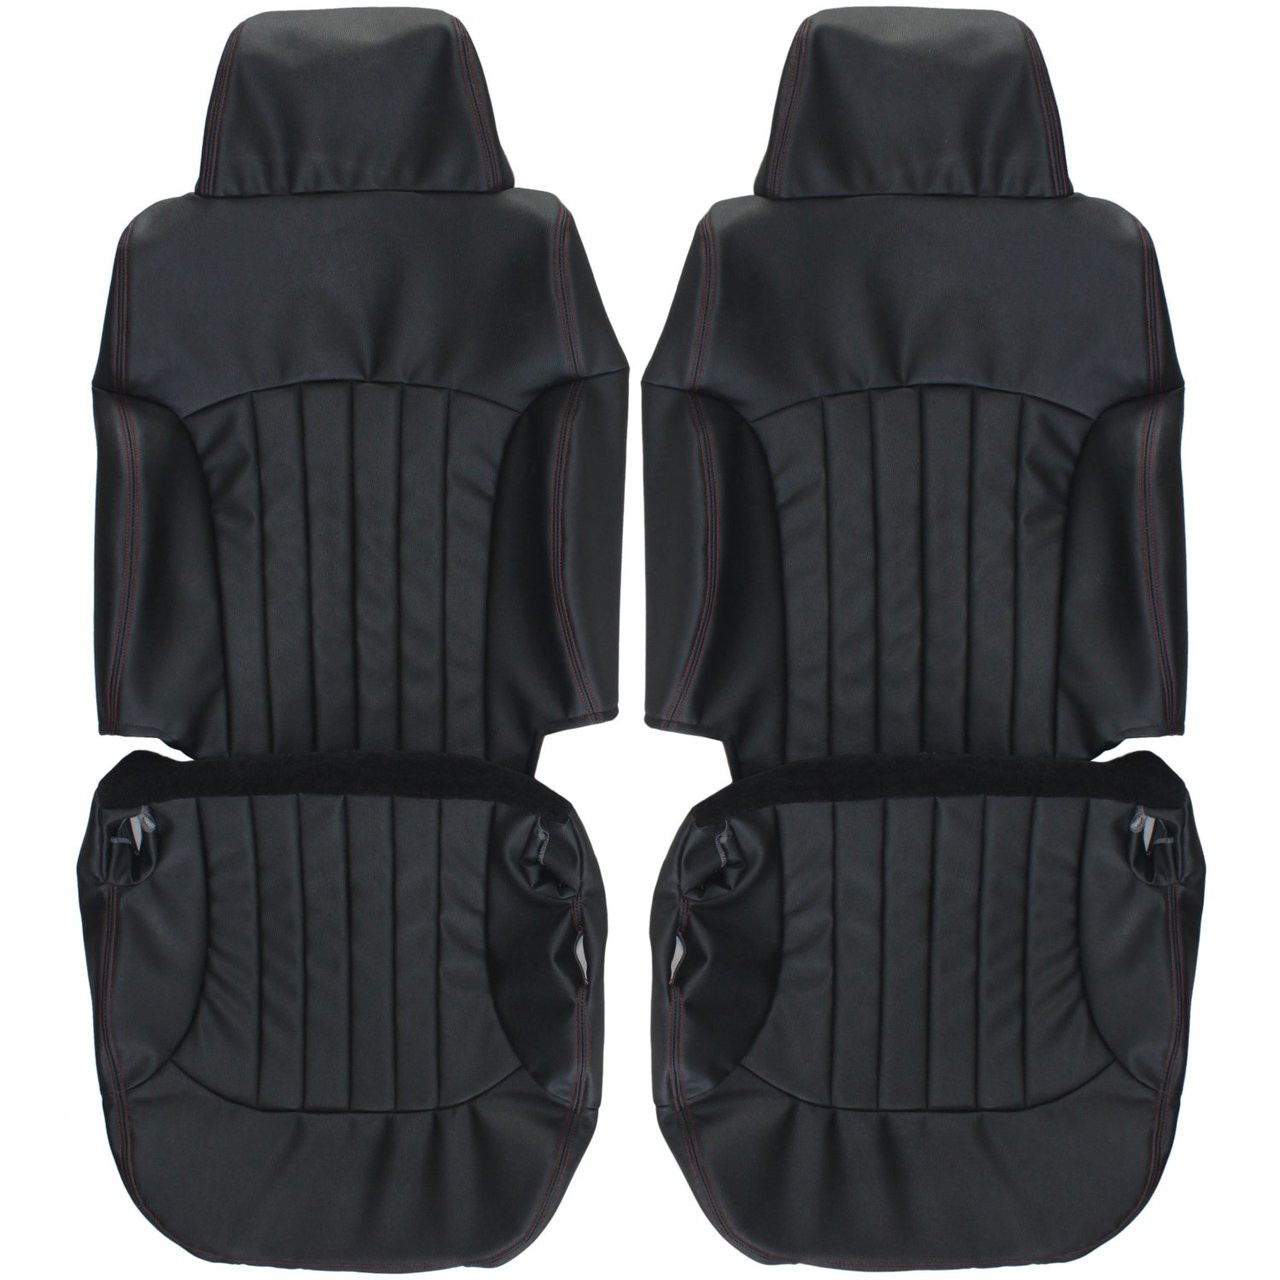 1998-2004 Chevrolet S10 Blazer Custom Real Leather Seat Covers (Front) -  Lseat.com